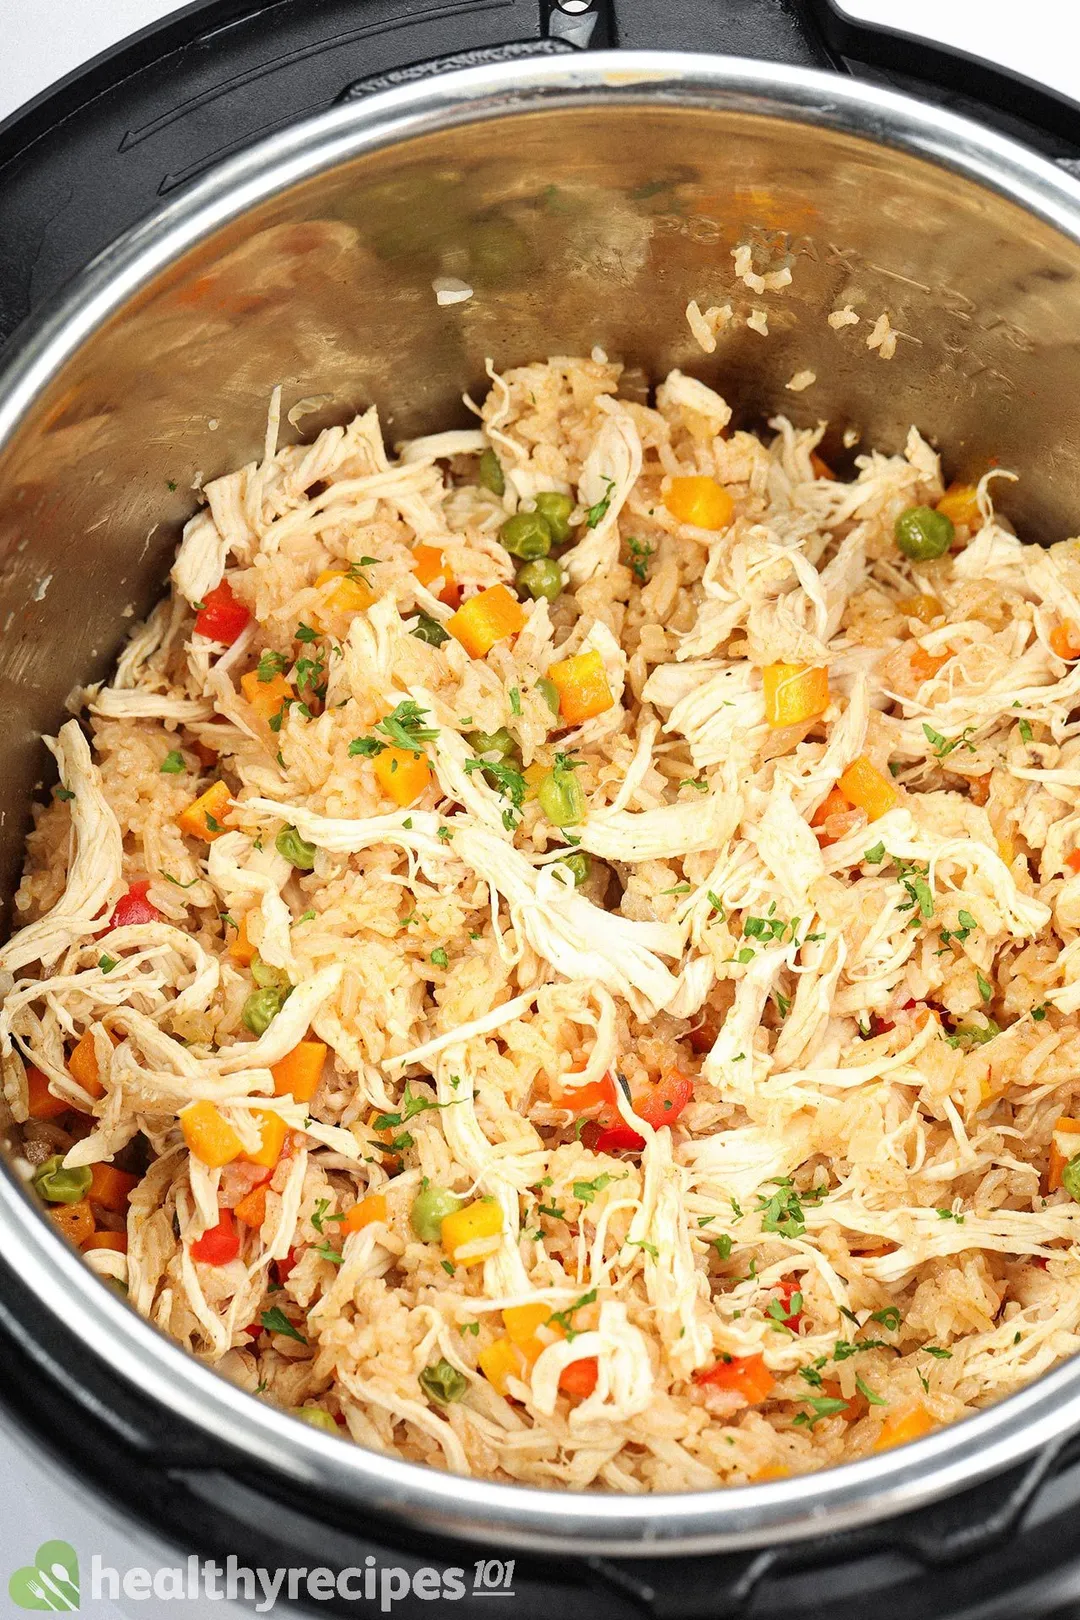 Rice cooked in an instant pot with shredded chicken, diced carrots, and green peas